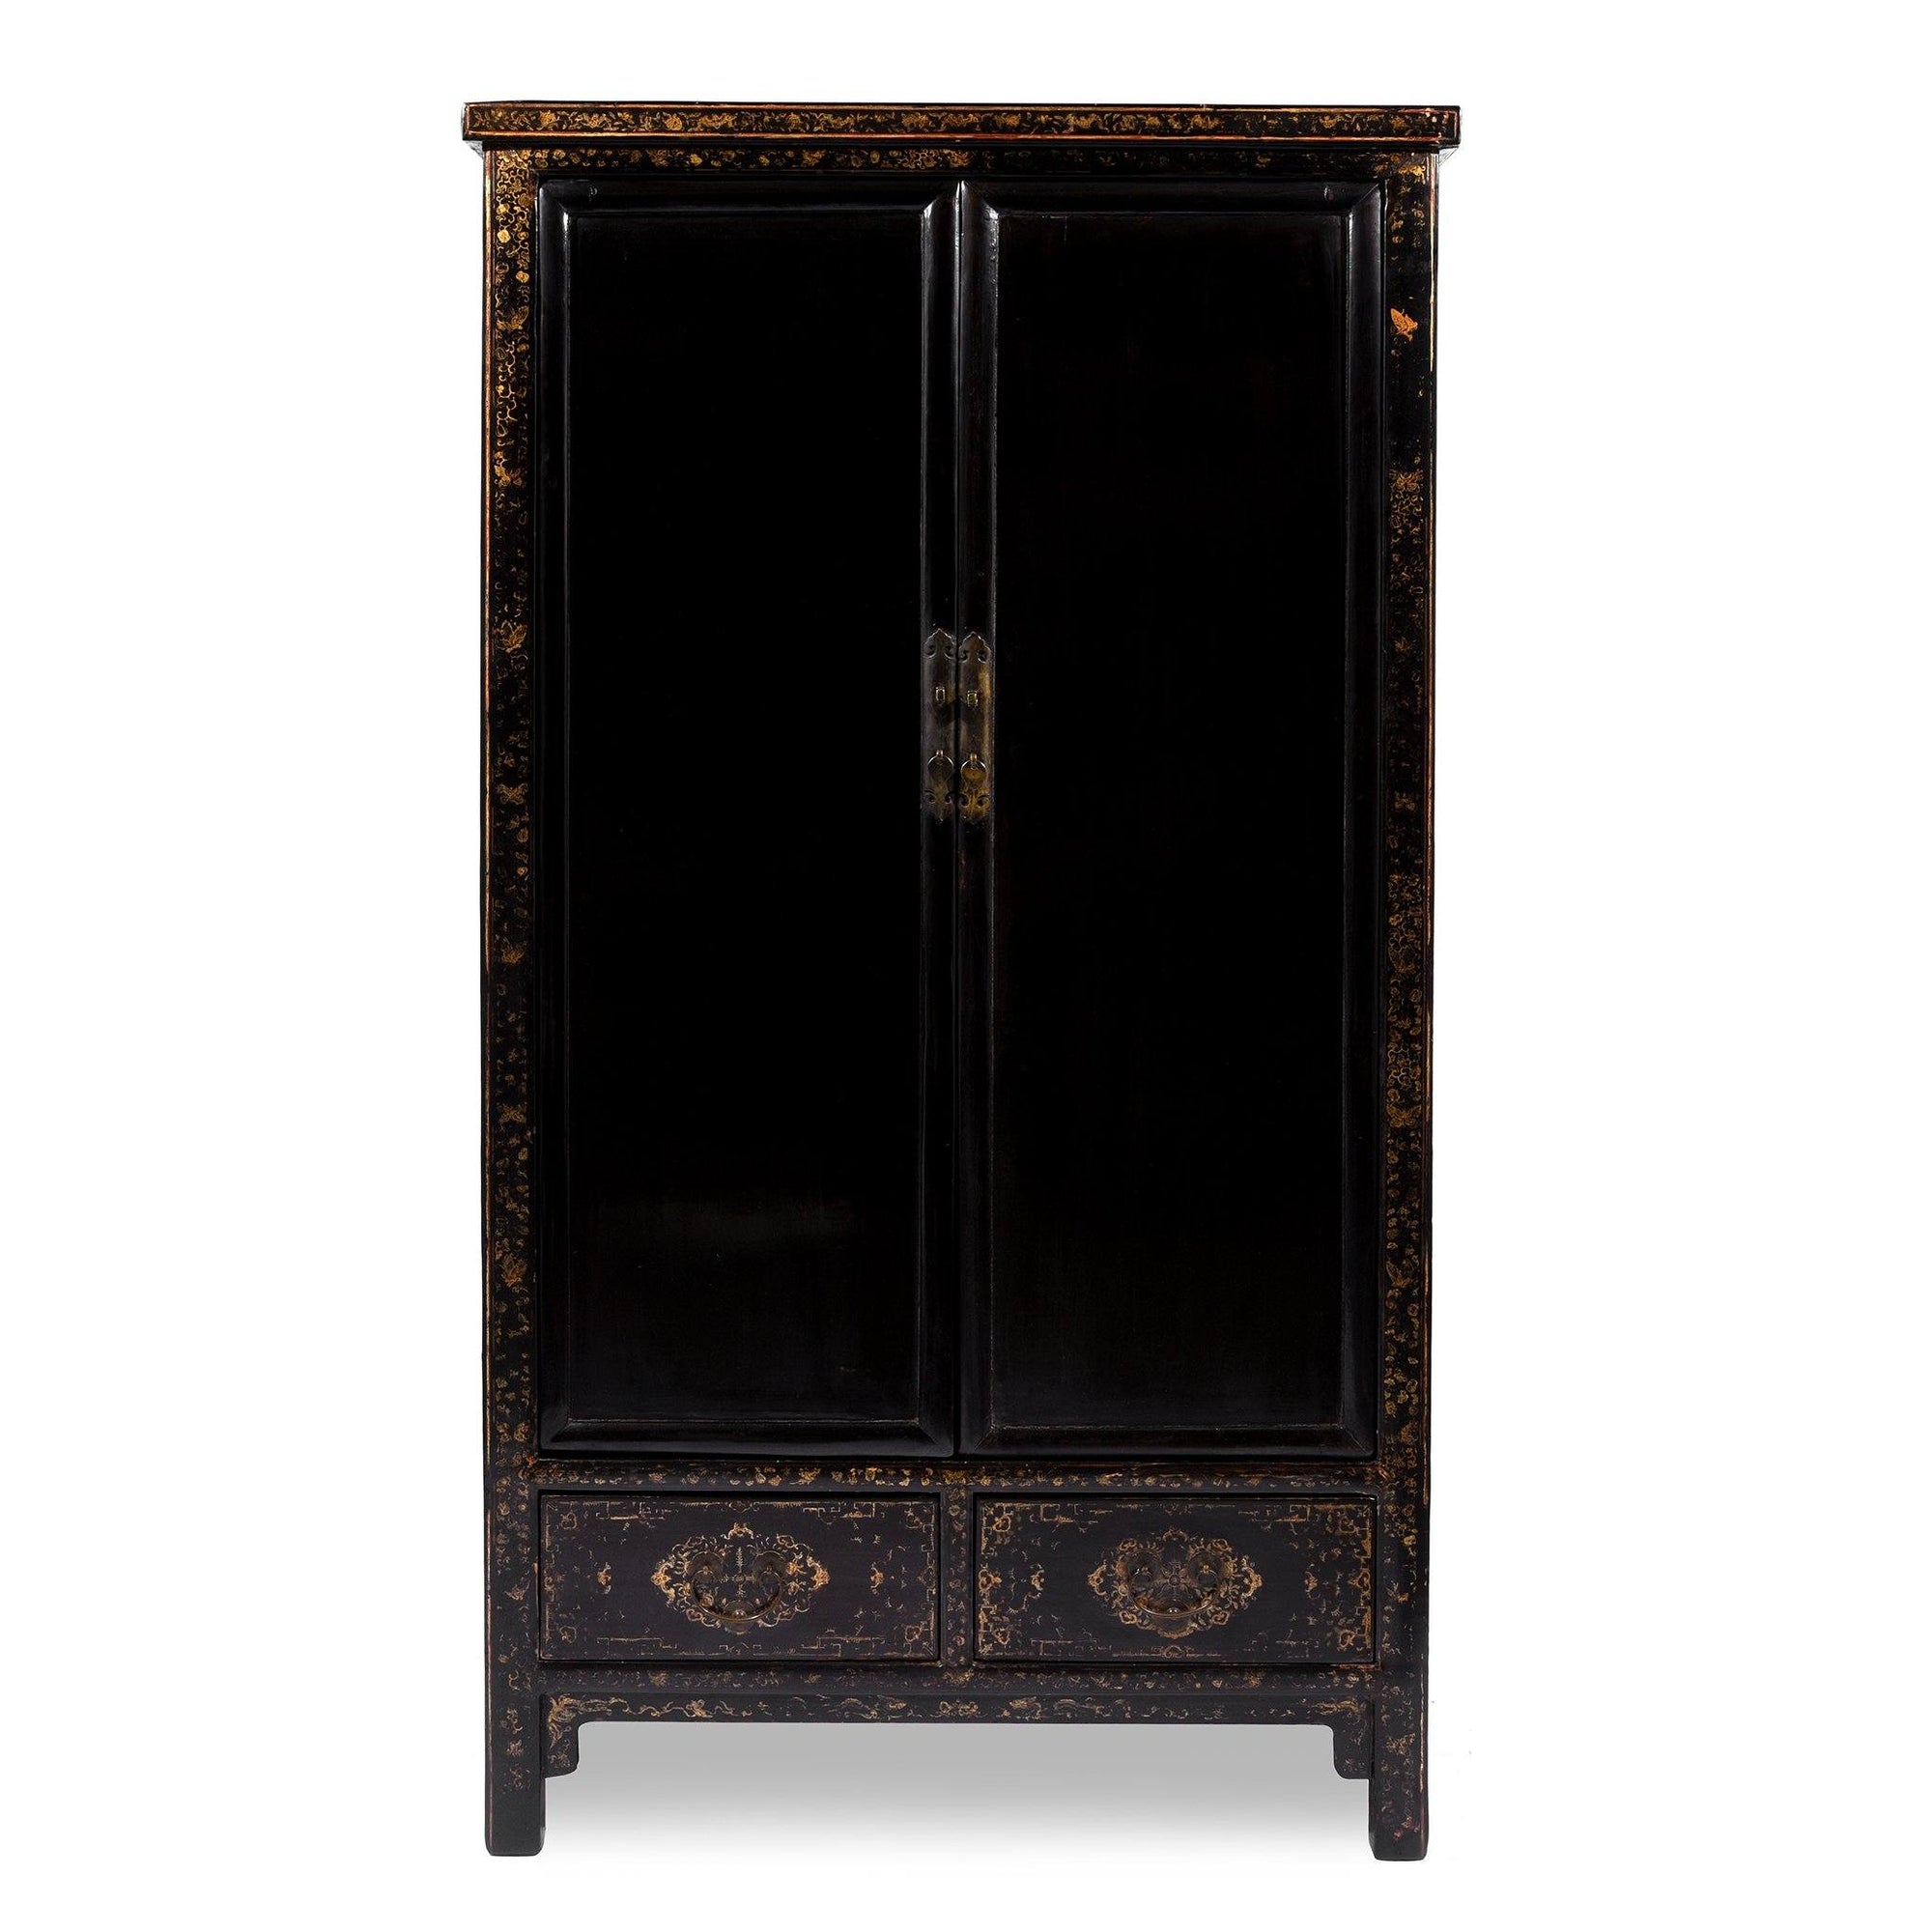 Chinese Export Gilt Black Lacquer Cabinet - Early 19thC | Indigo Antiques